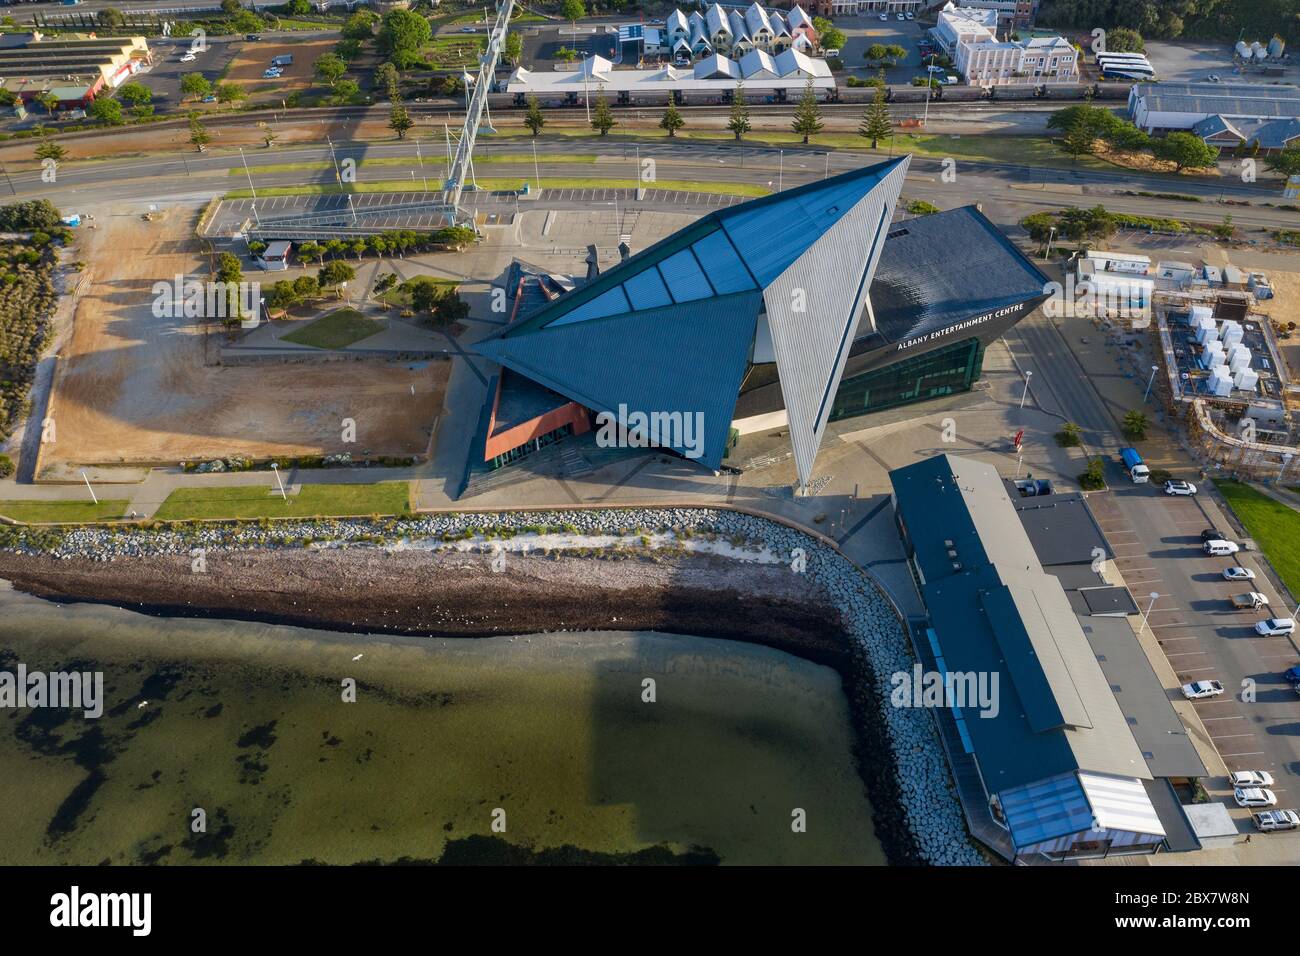 Albany Western Australia November 10th 2019 : Aerial drone view of Albany Entertainment Centre in Western Australia at dawn Stock Photo